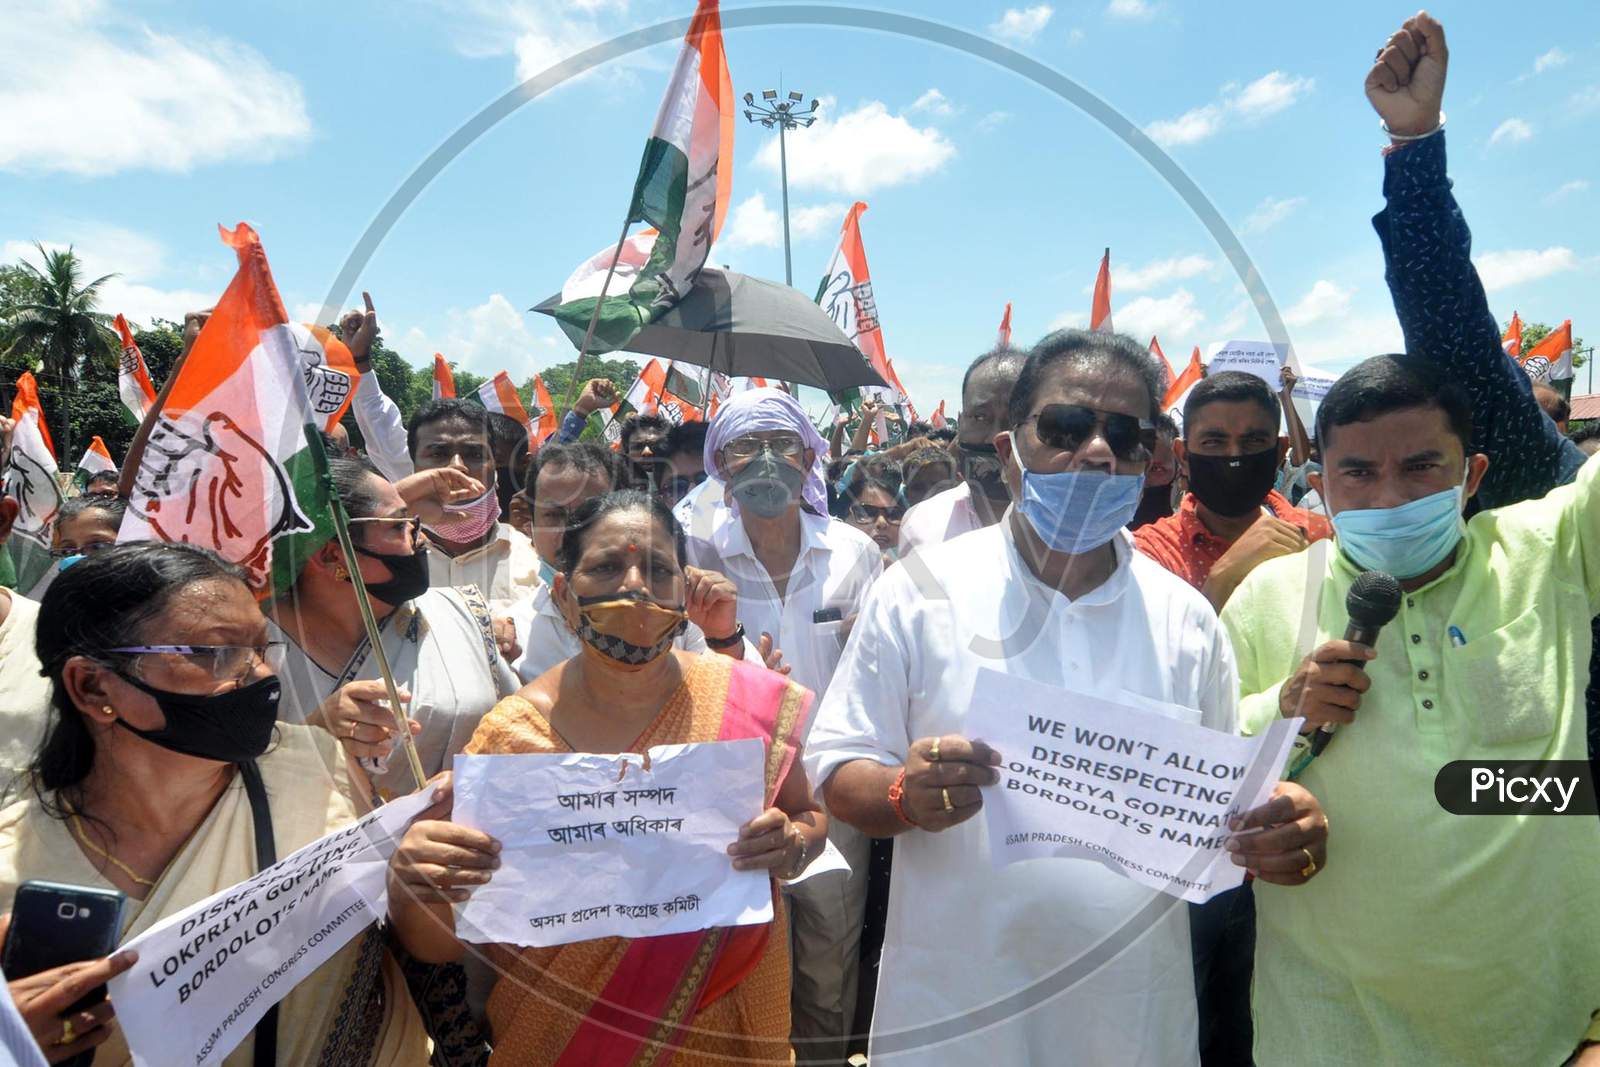 Senior Congress leaders with APCC members stage a protest over Centre's approval to lease three airports, Jaipur, Guwahati and Thiruvananthapuram, under the public-private partnership (PPP) model, outside LGBI Airport in Guwahati, Monday, Aug. 24, 2020.